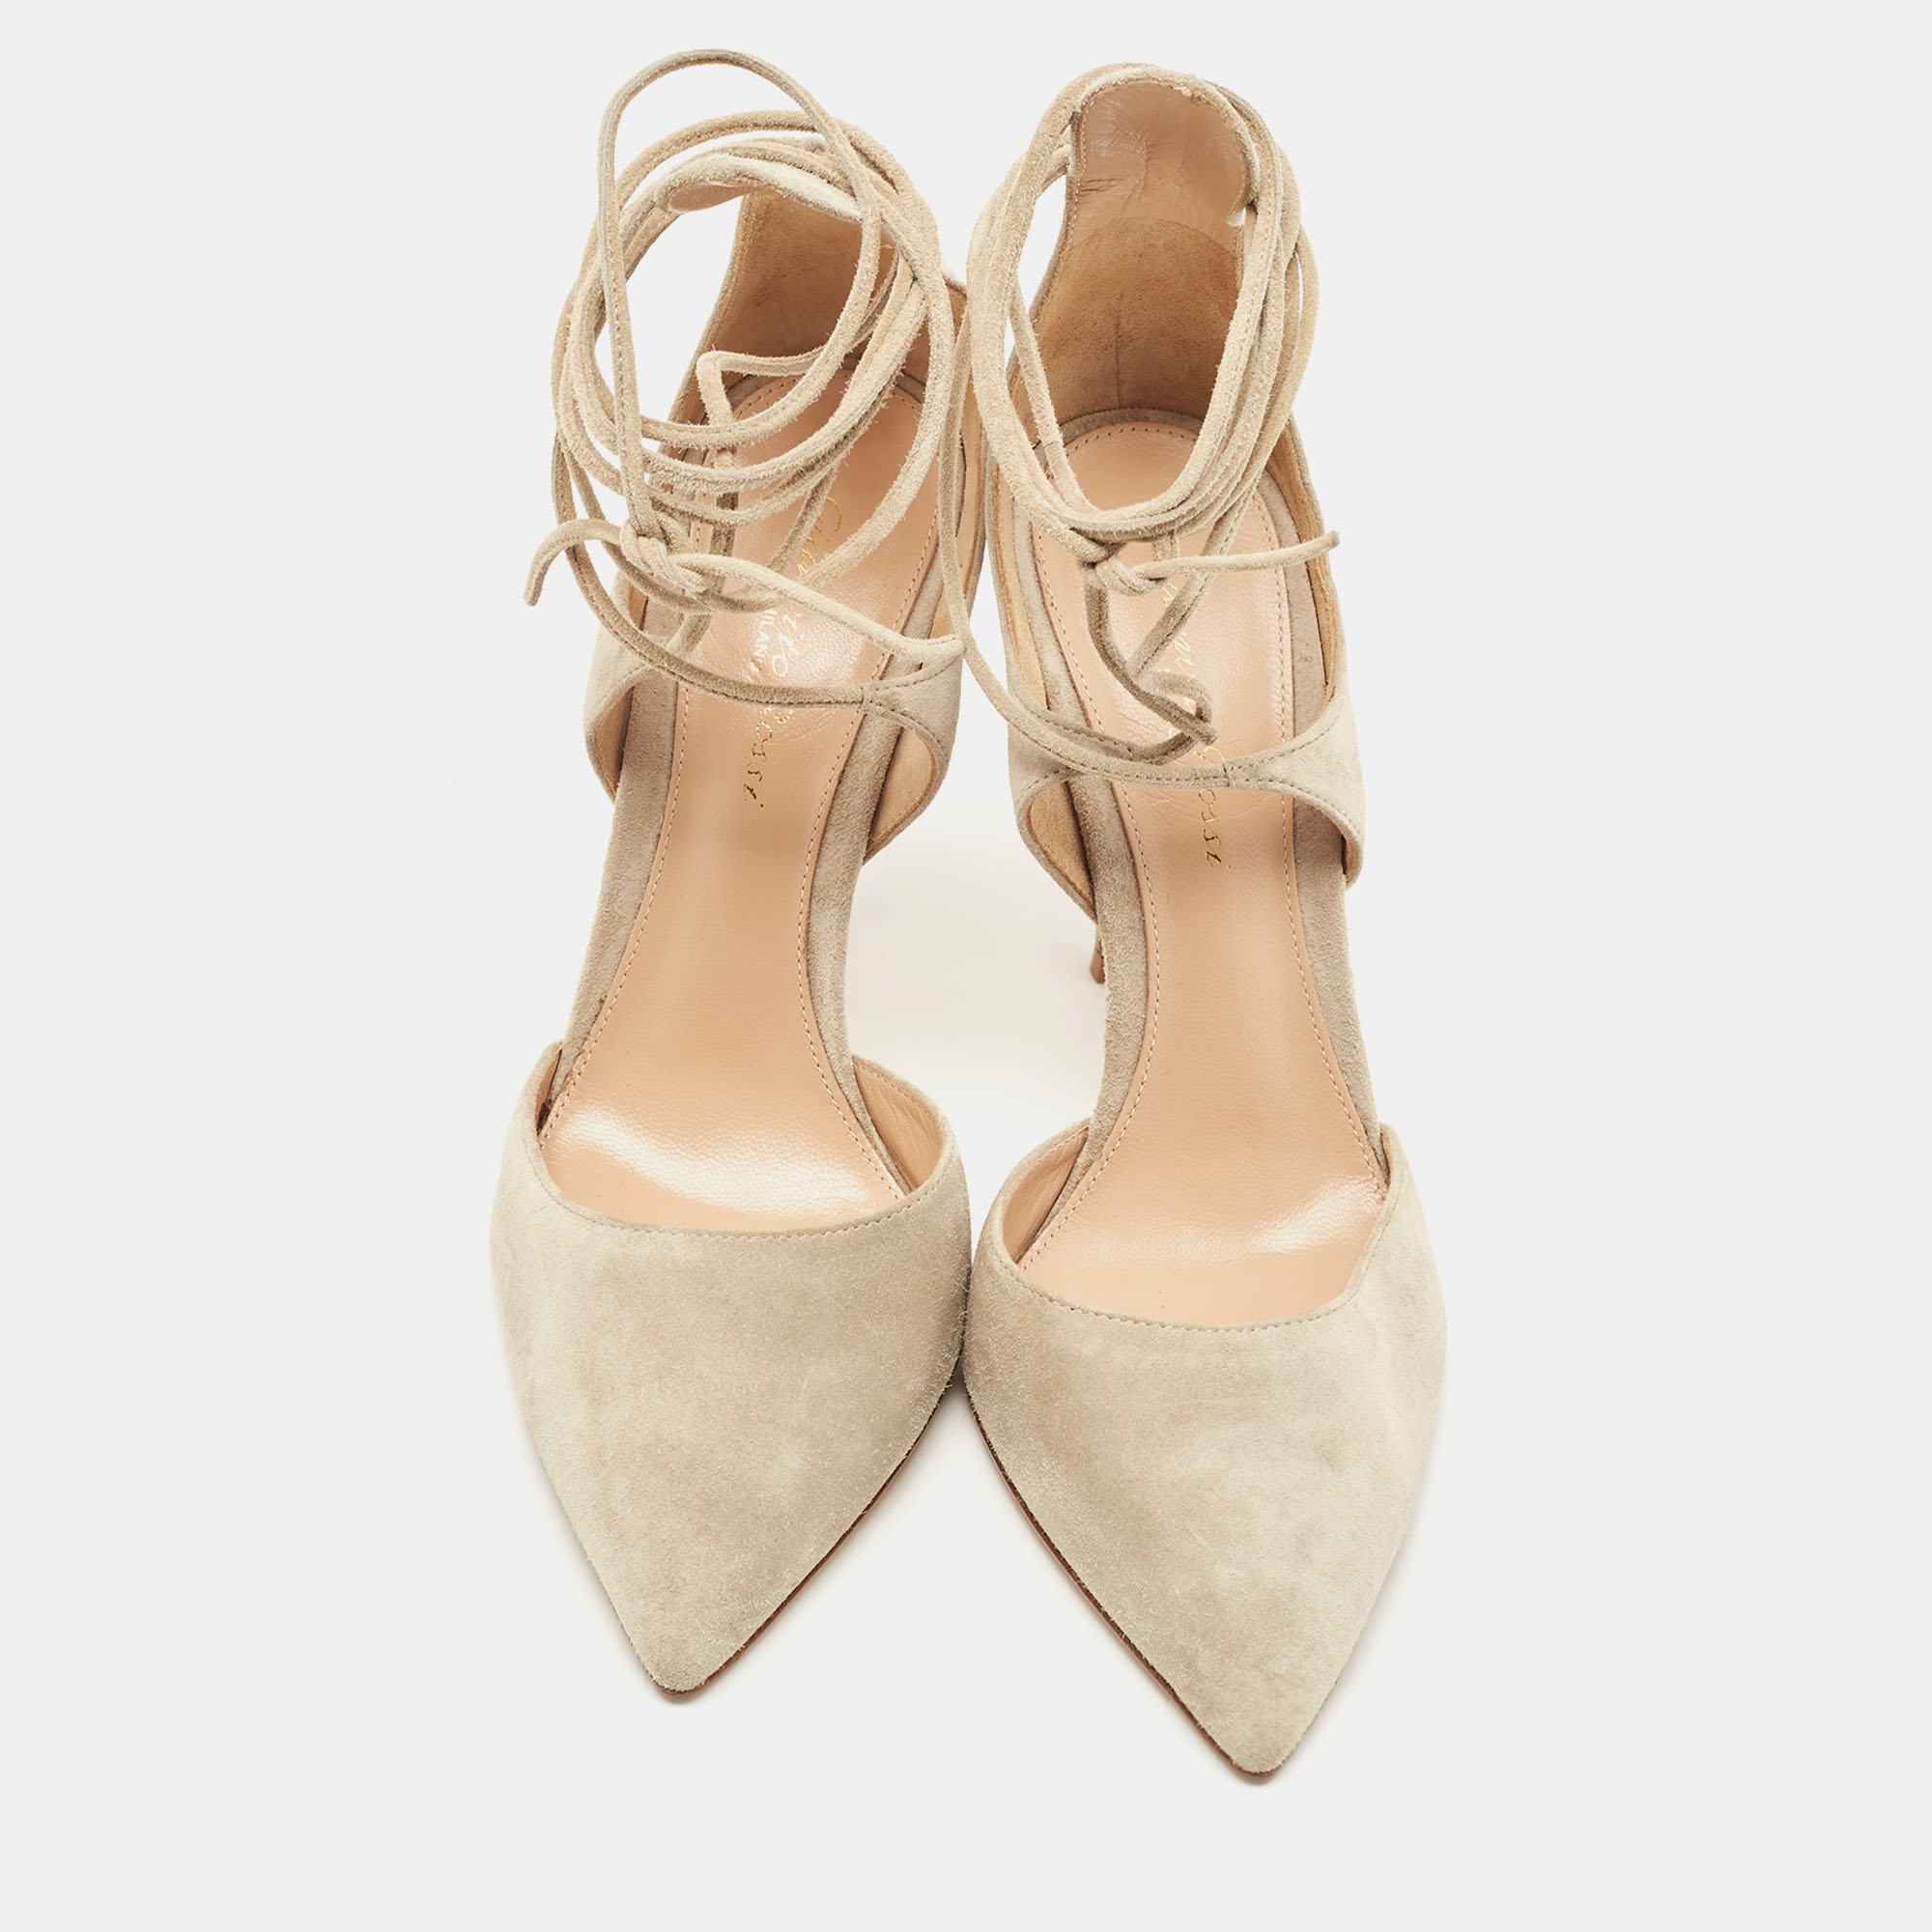 Gianvito Rossi Beige Suede Ankle Wrap Pointed Toe Pumps Size 37.5